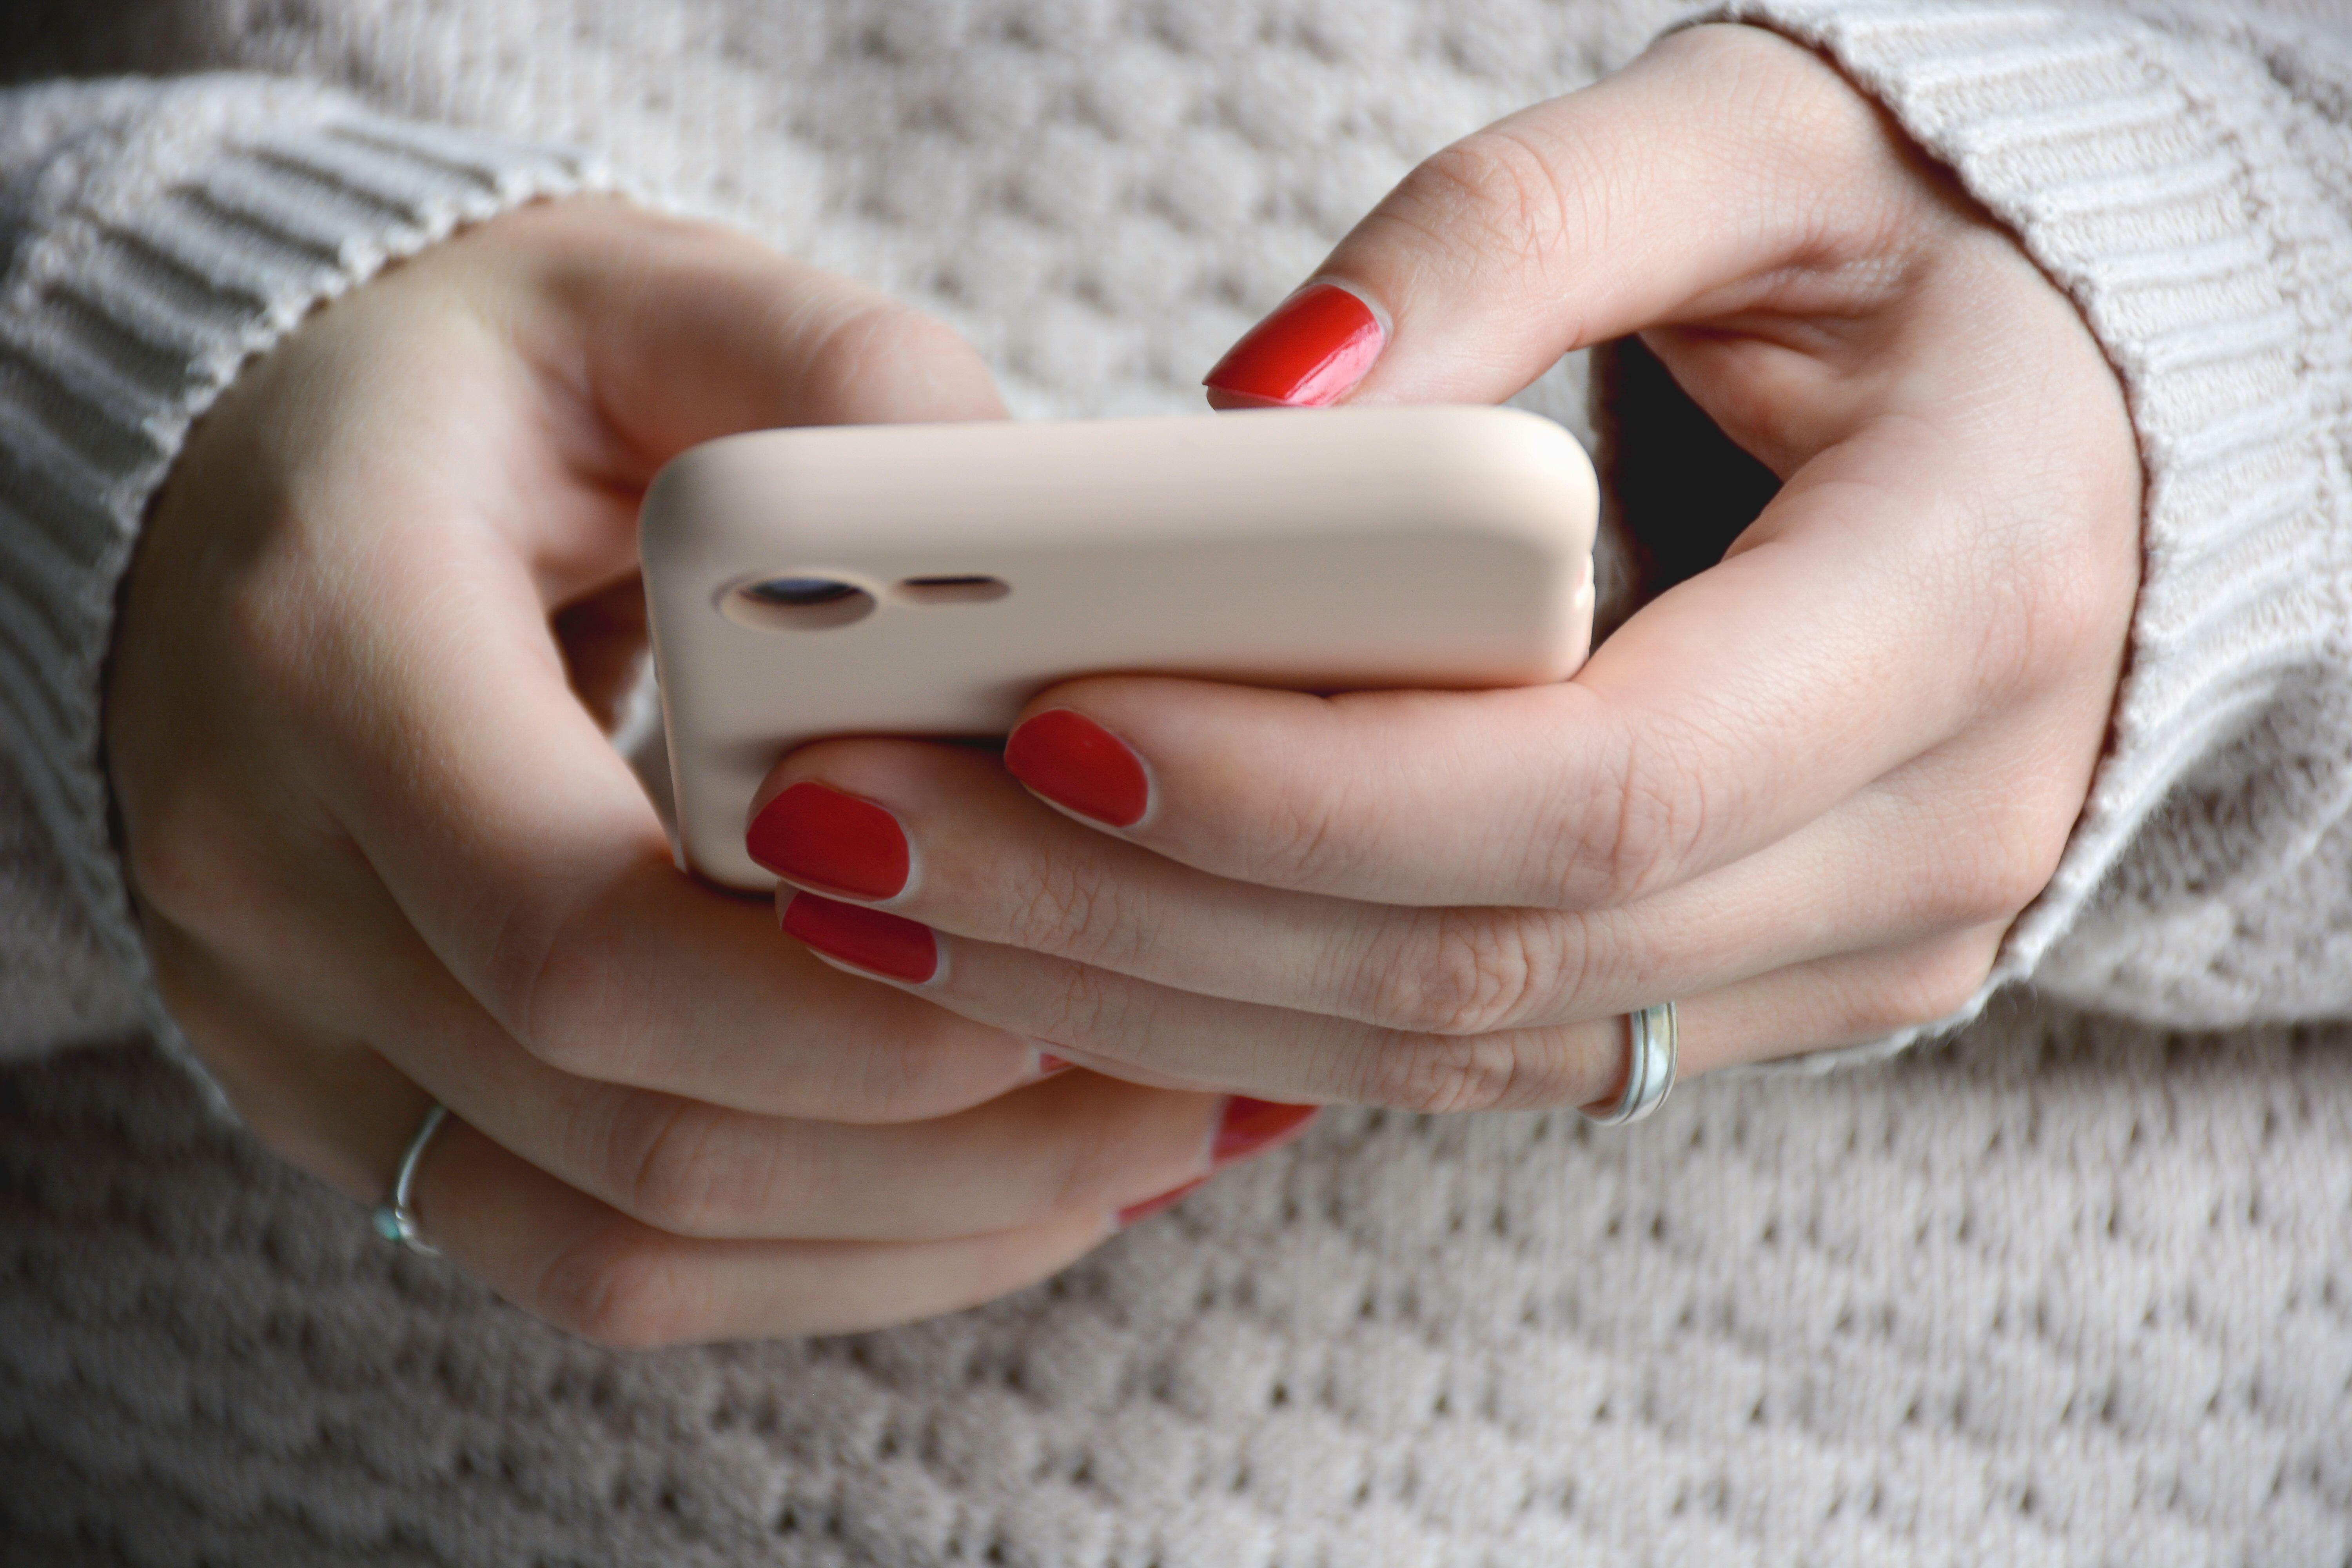 Yes, Phones Can Reveal if Someone Gets an Abortion thumbnail